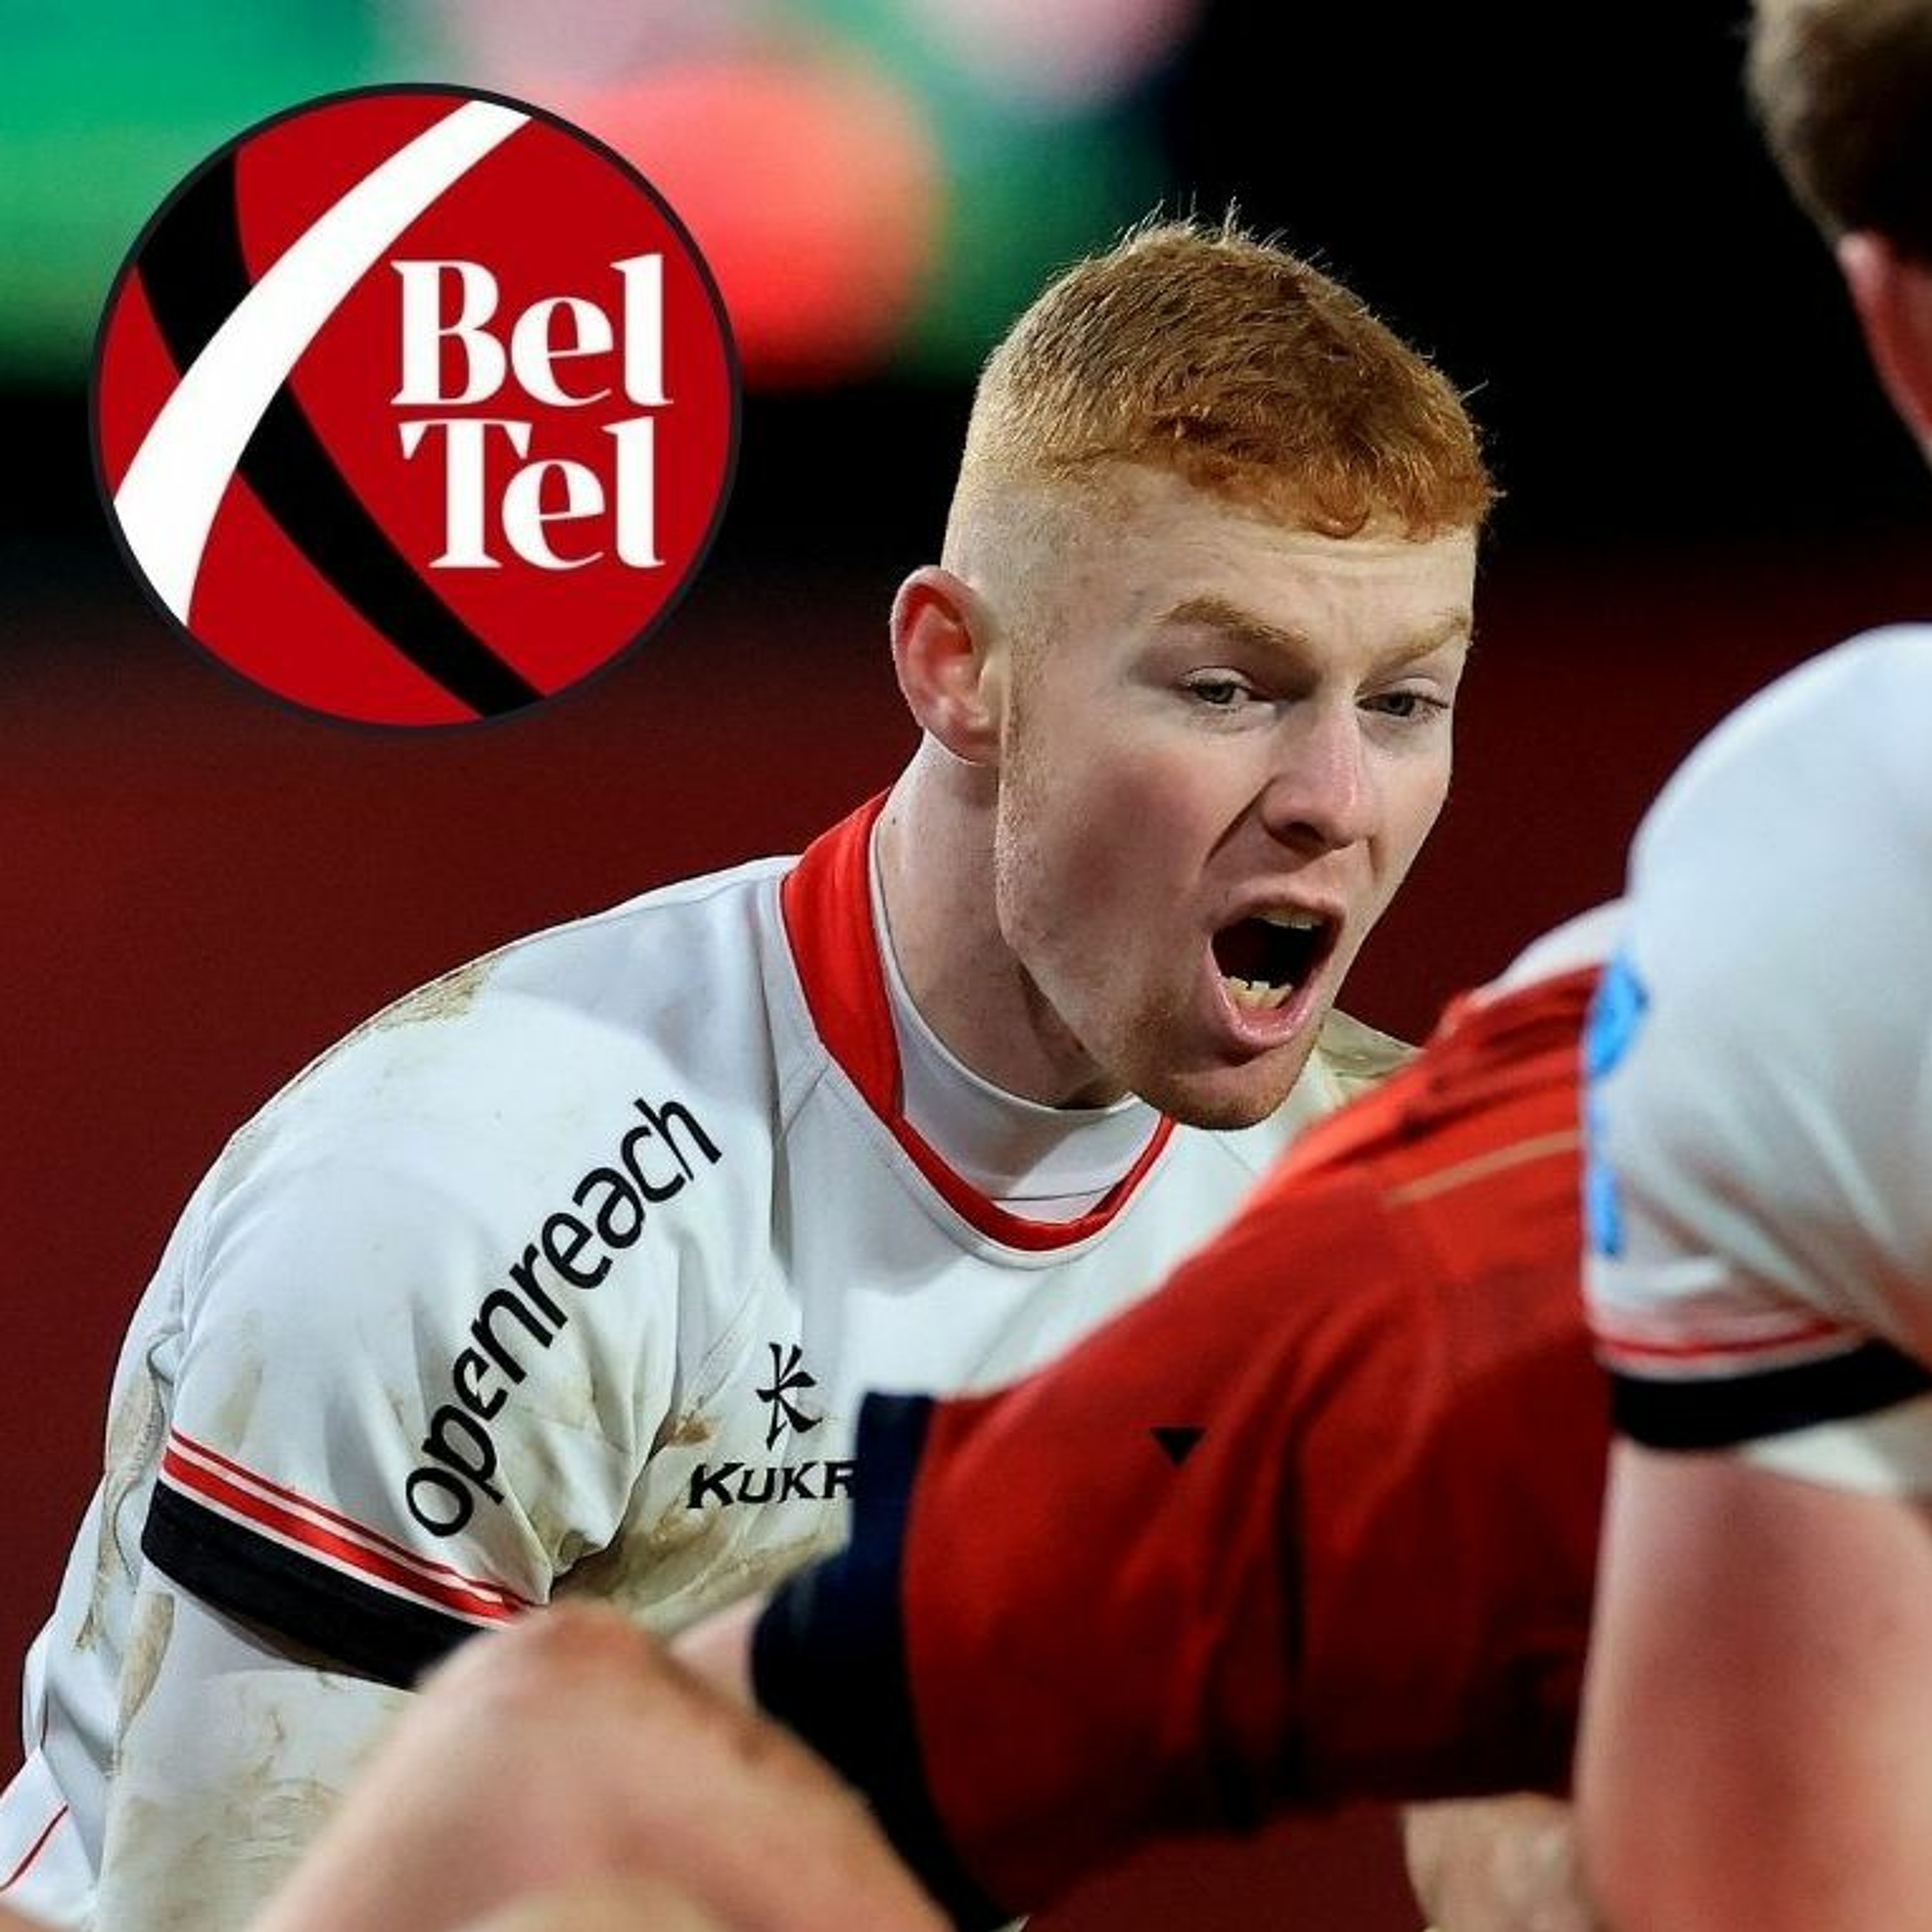 Ulster's tactical debate after defeat to Munster and the wonderful psychology of us sports fanatics